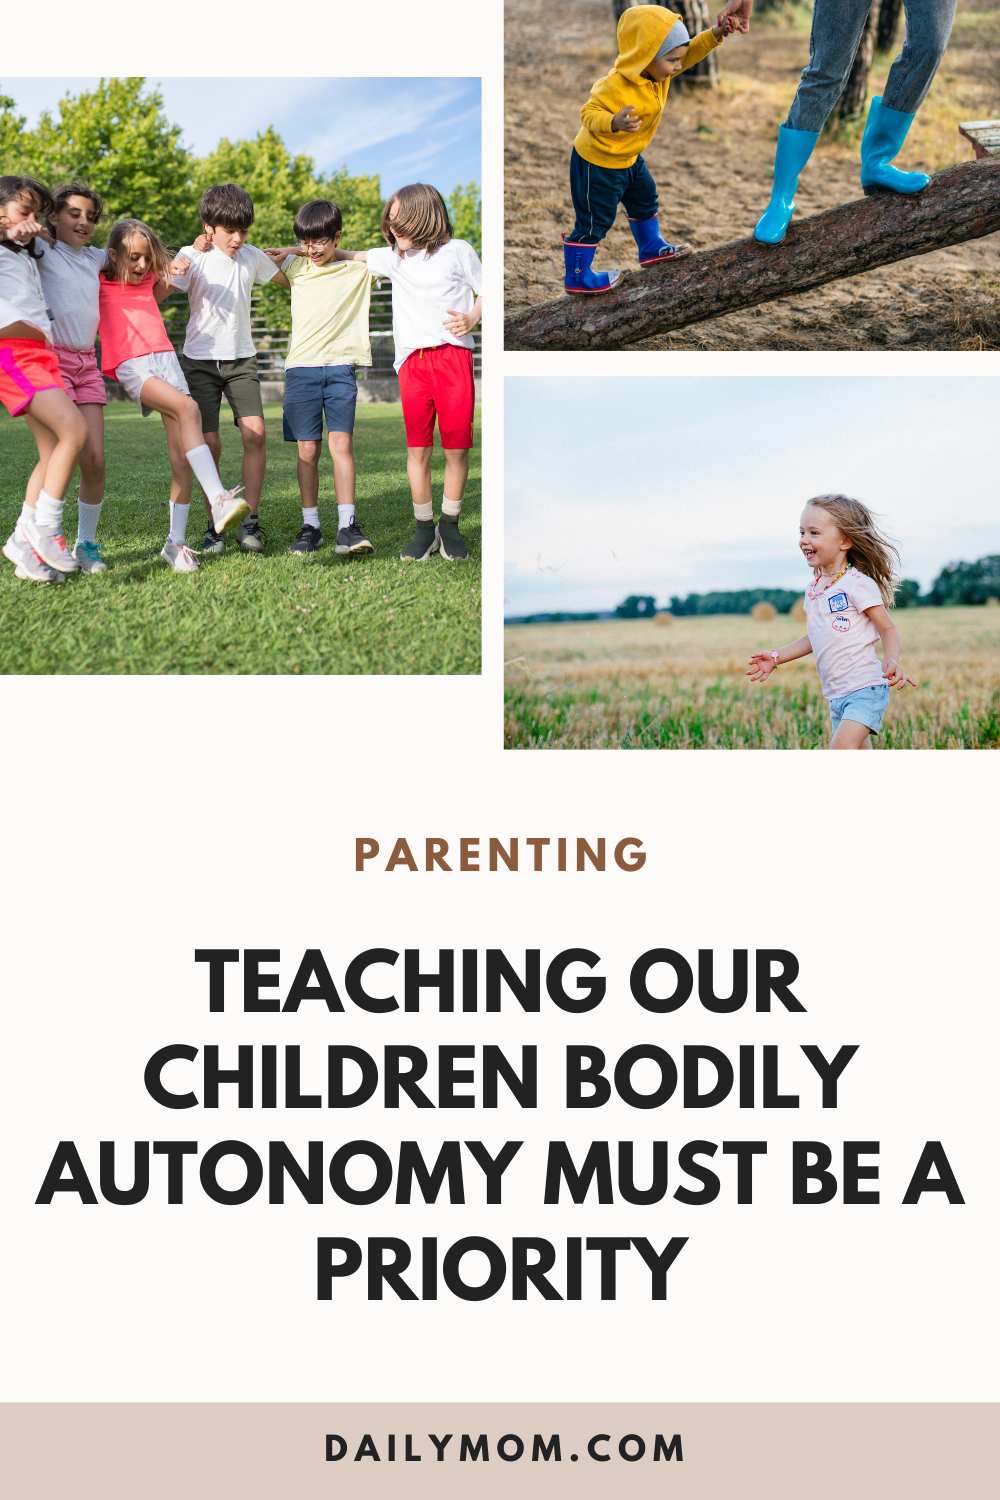 Teaching Our Children Bodily Autonomy Must Be A Steady Priority